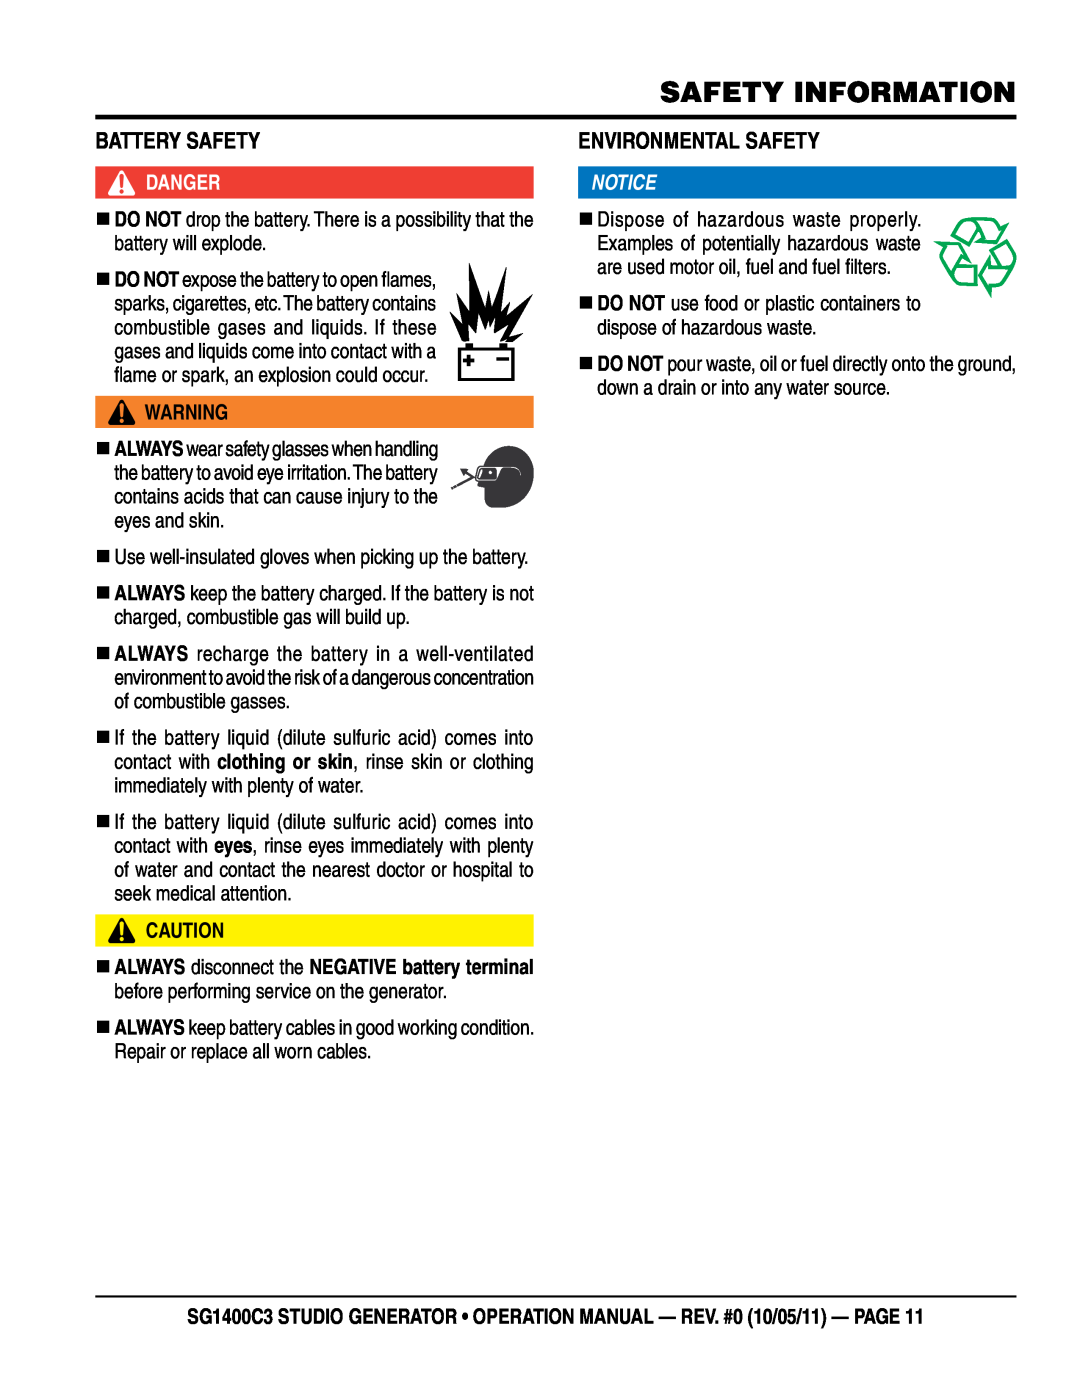 Multiquip SG1400C3 operation manual BaTTerY SaFeTY, environmenTal SaFeTY, Safety Information, danger 